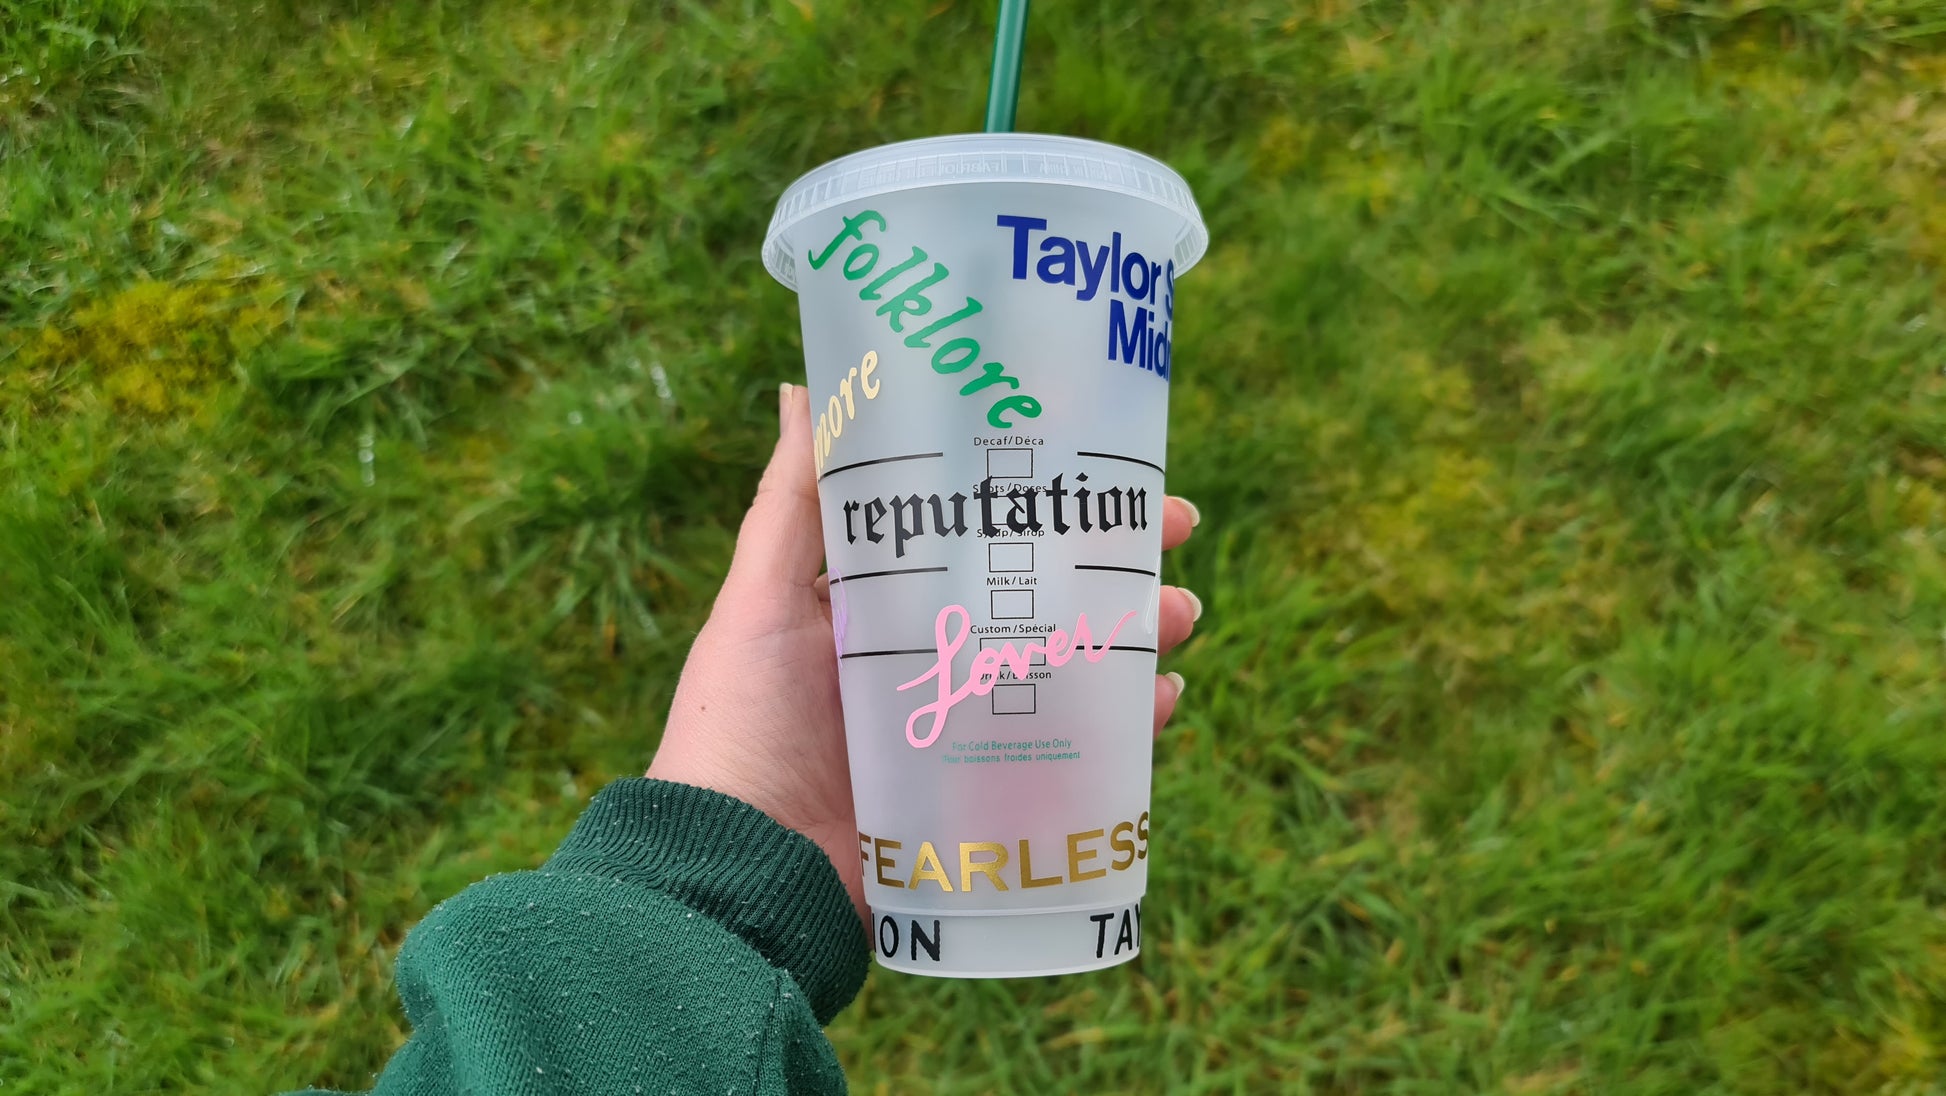 Taylor Swift inspired Starbucks cup🖤 #taylorswift #taylorswiftreputation  #reputation #1989 #fearless #evermore #folklore #lover #red…